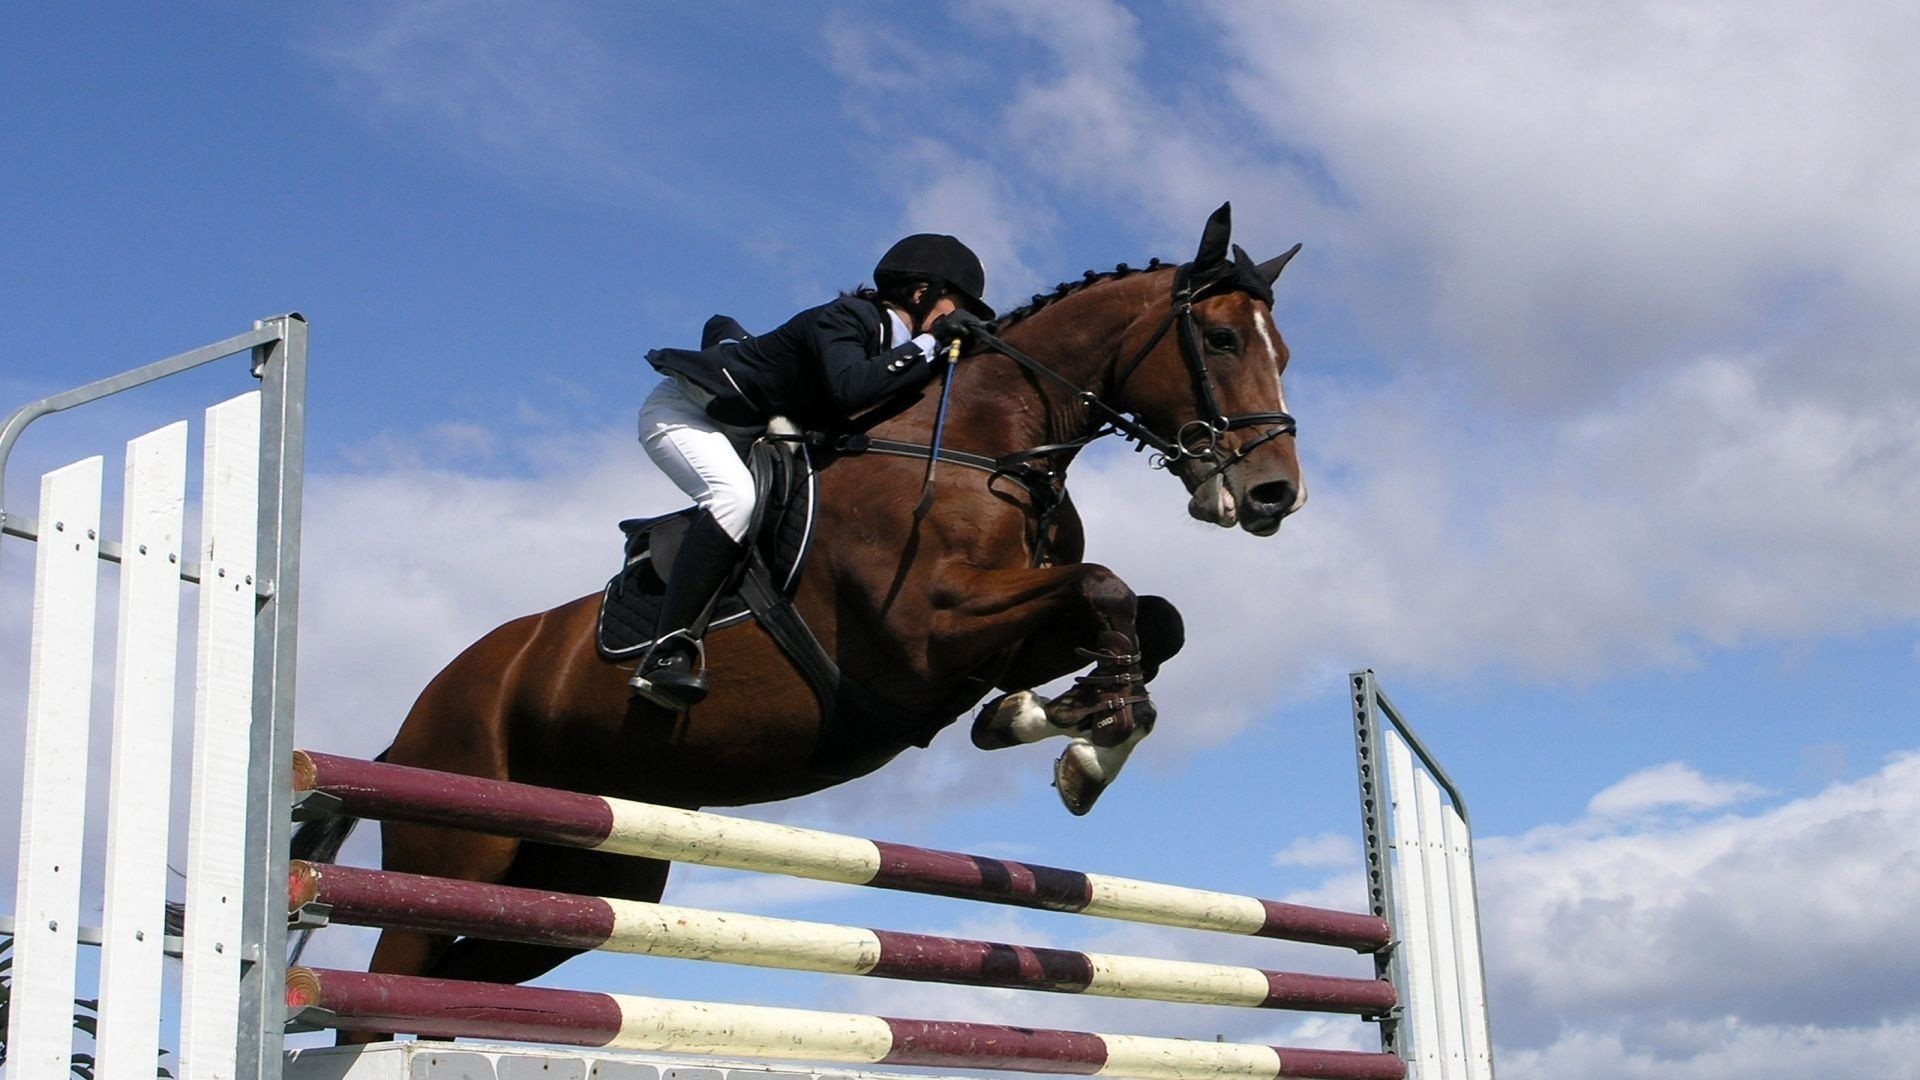 Eventing: Show jumping, A professional equestrian sport and an official Olympic discipline. 1920x1080 Full HD Background.